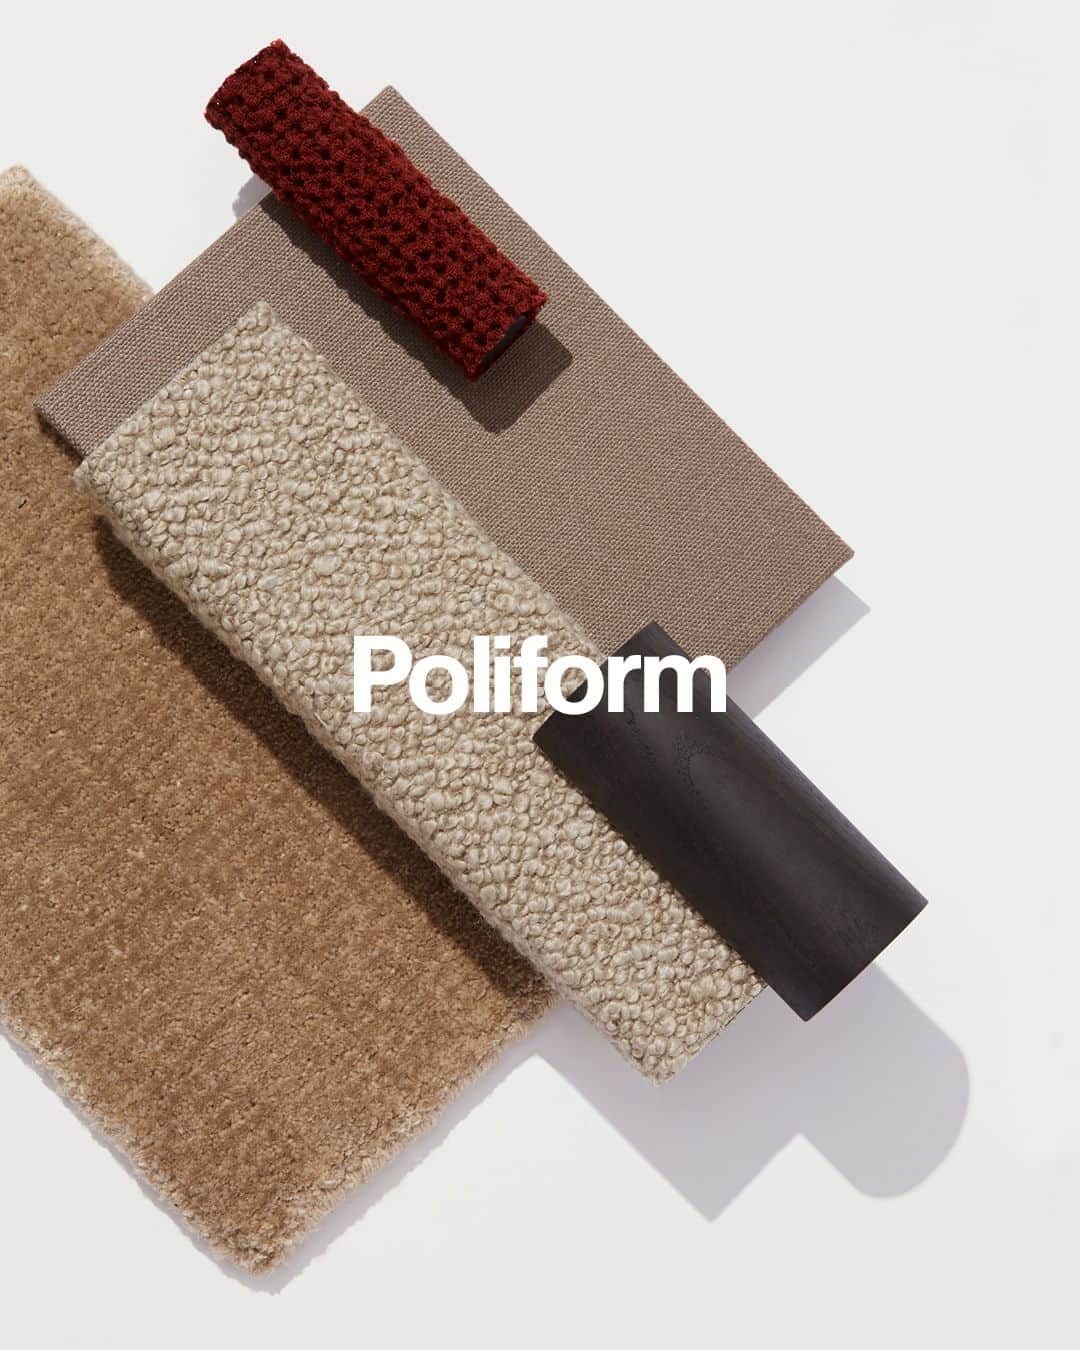 Poliform|Varennaのインスタグラム：「The choice of materials is fundamental in a design process. Discover the character and uniqueness of Poliform finishes. Let yourself be inspired by the vast range of textiles, fabrics and materials on poliform.com.  #poliform #design #madeinitaly #designinspiration #poliforminspiration #materials #designtrends #furniturematerials #poliformstyle #home #homedesign」